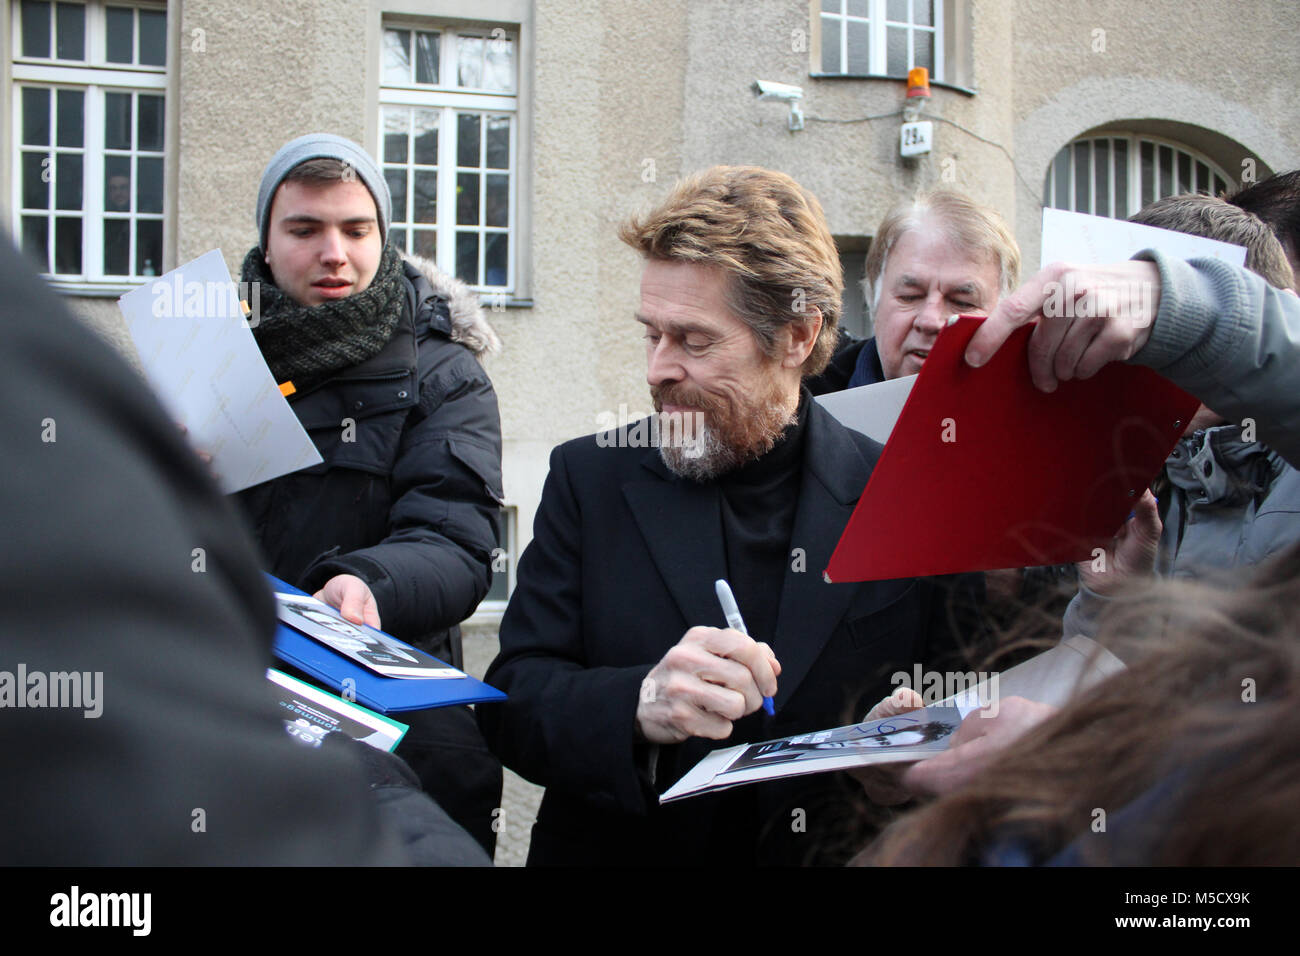 Willem Defoe gives autographs to his fans. 68th BERLINALE, Where: Berlin/Germany, When:, Featuring: Willem Dafoe, When: 21th February 2018 Stock Photo